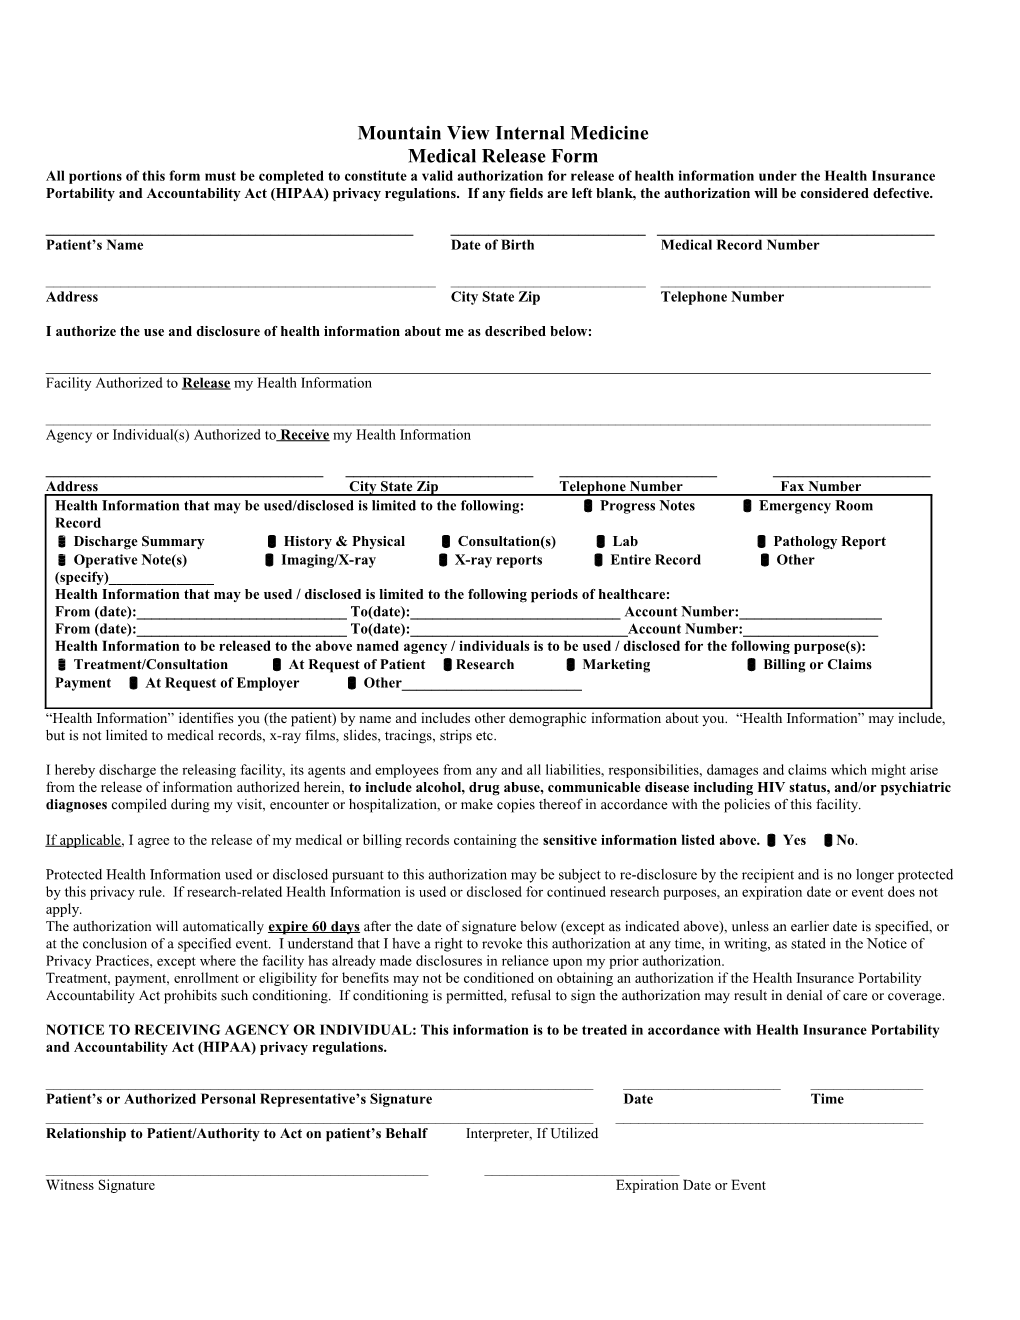 All Portions of This Form Must Be Completed to Constitute a Valid Authorization for Release